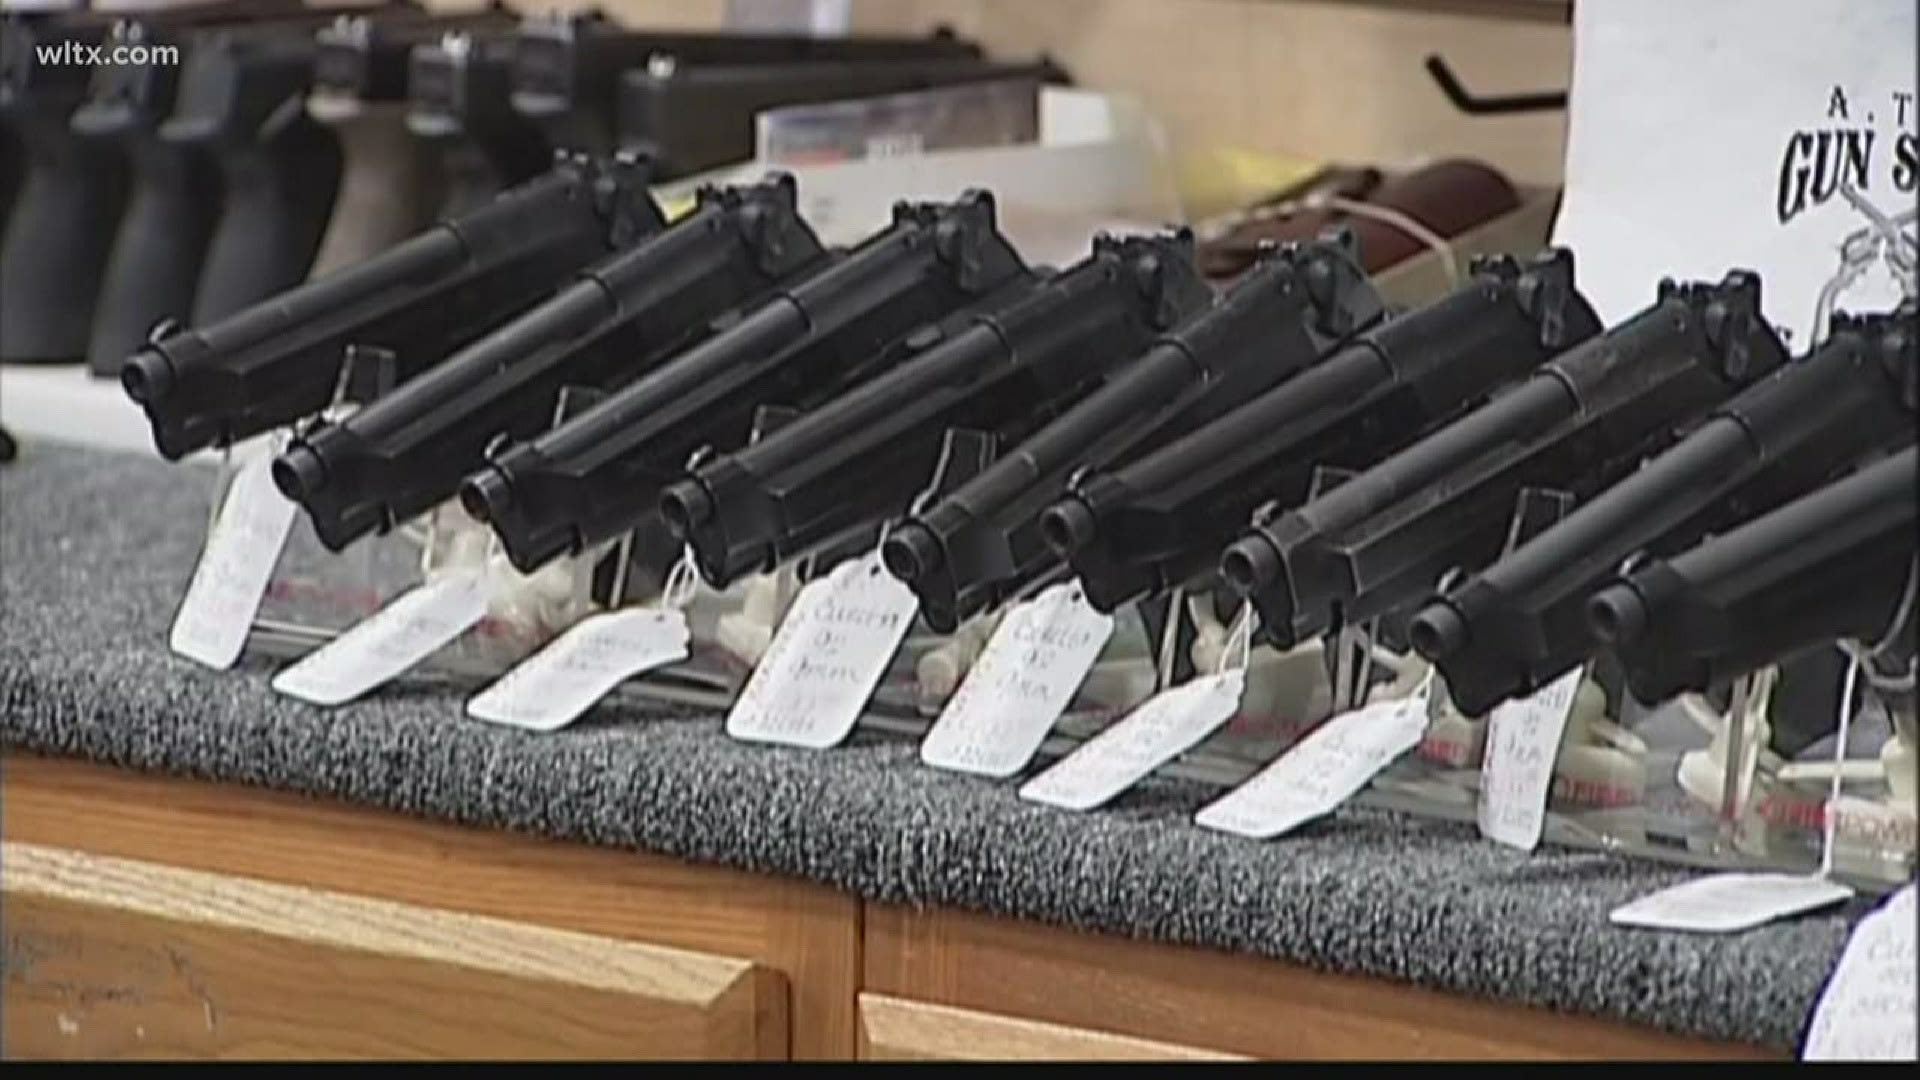 The Kershaw County Sheriff took to Facebook to address what he said has been a spike in gun sales recently.